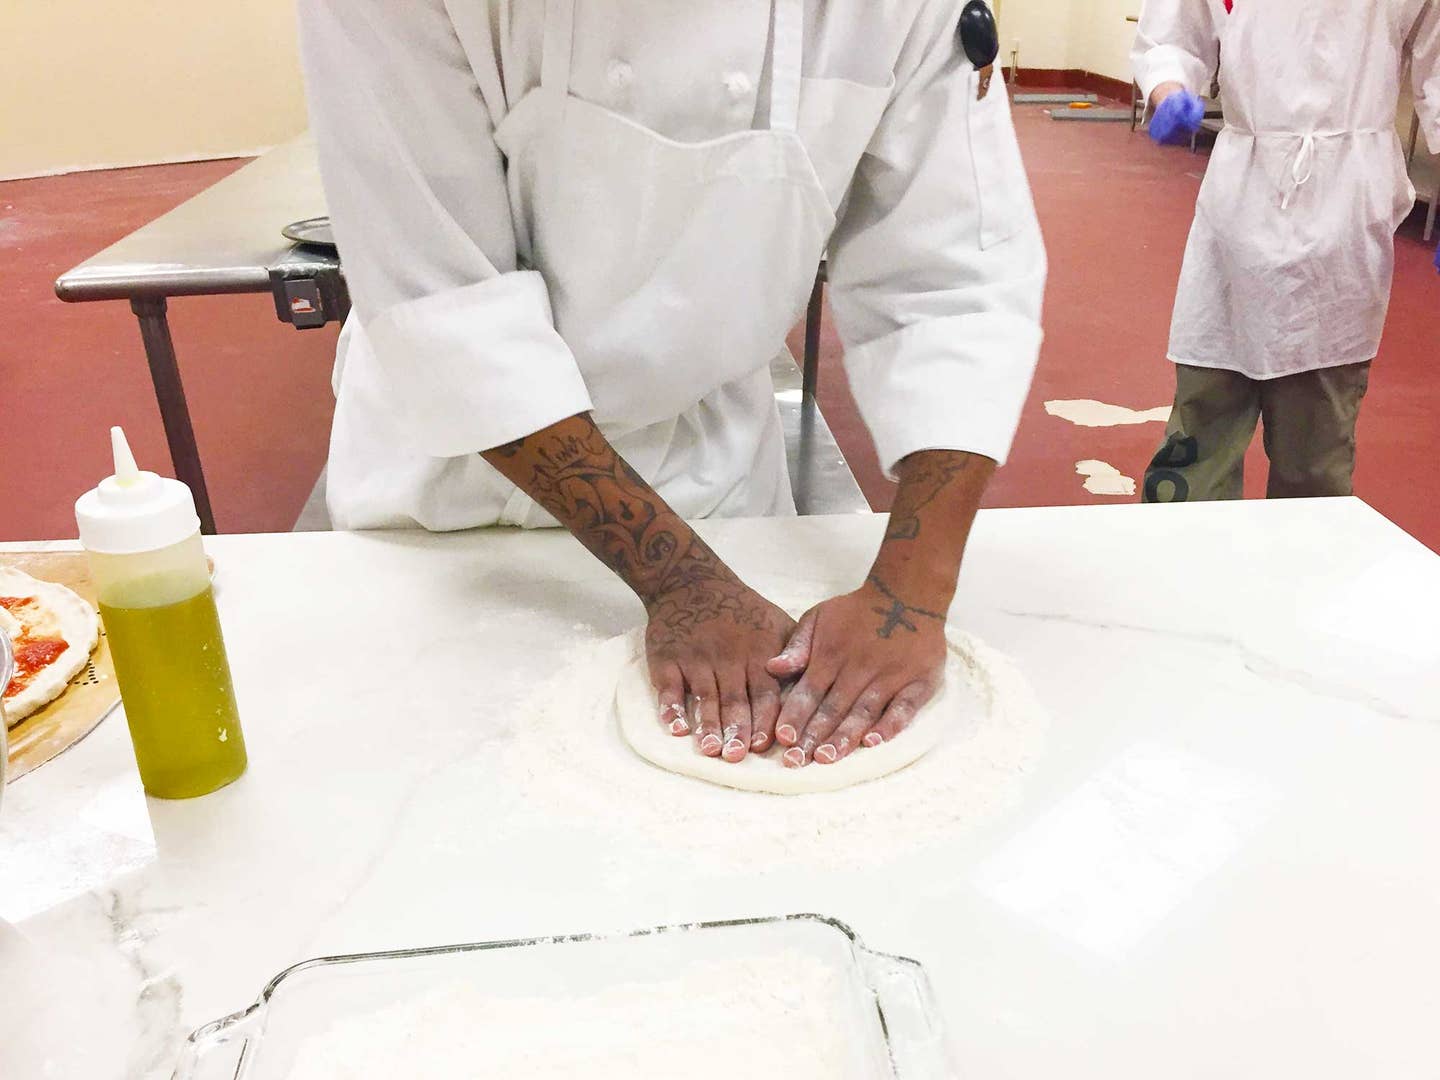 How a Pizza Non-Profit Prepares Inmates for Life Beyond Prison Walls